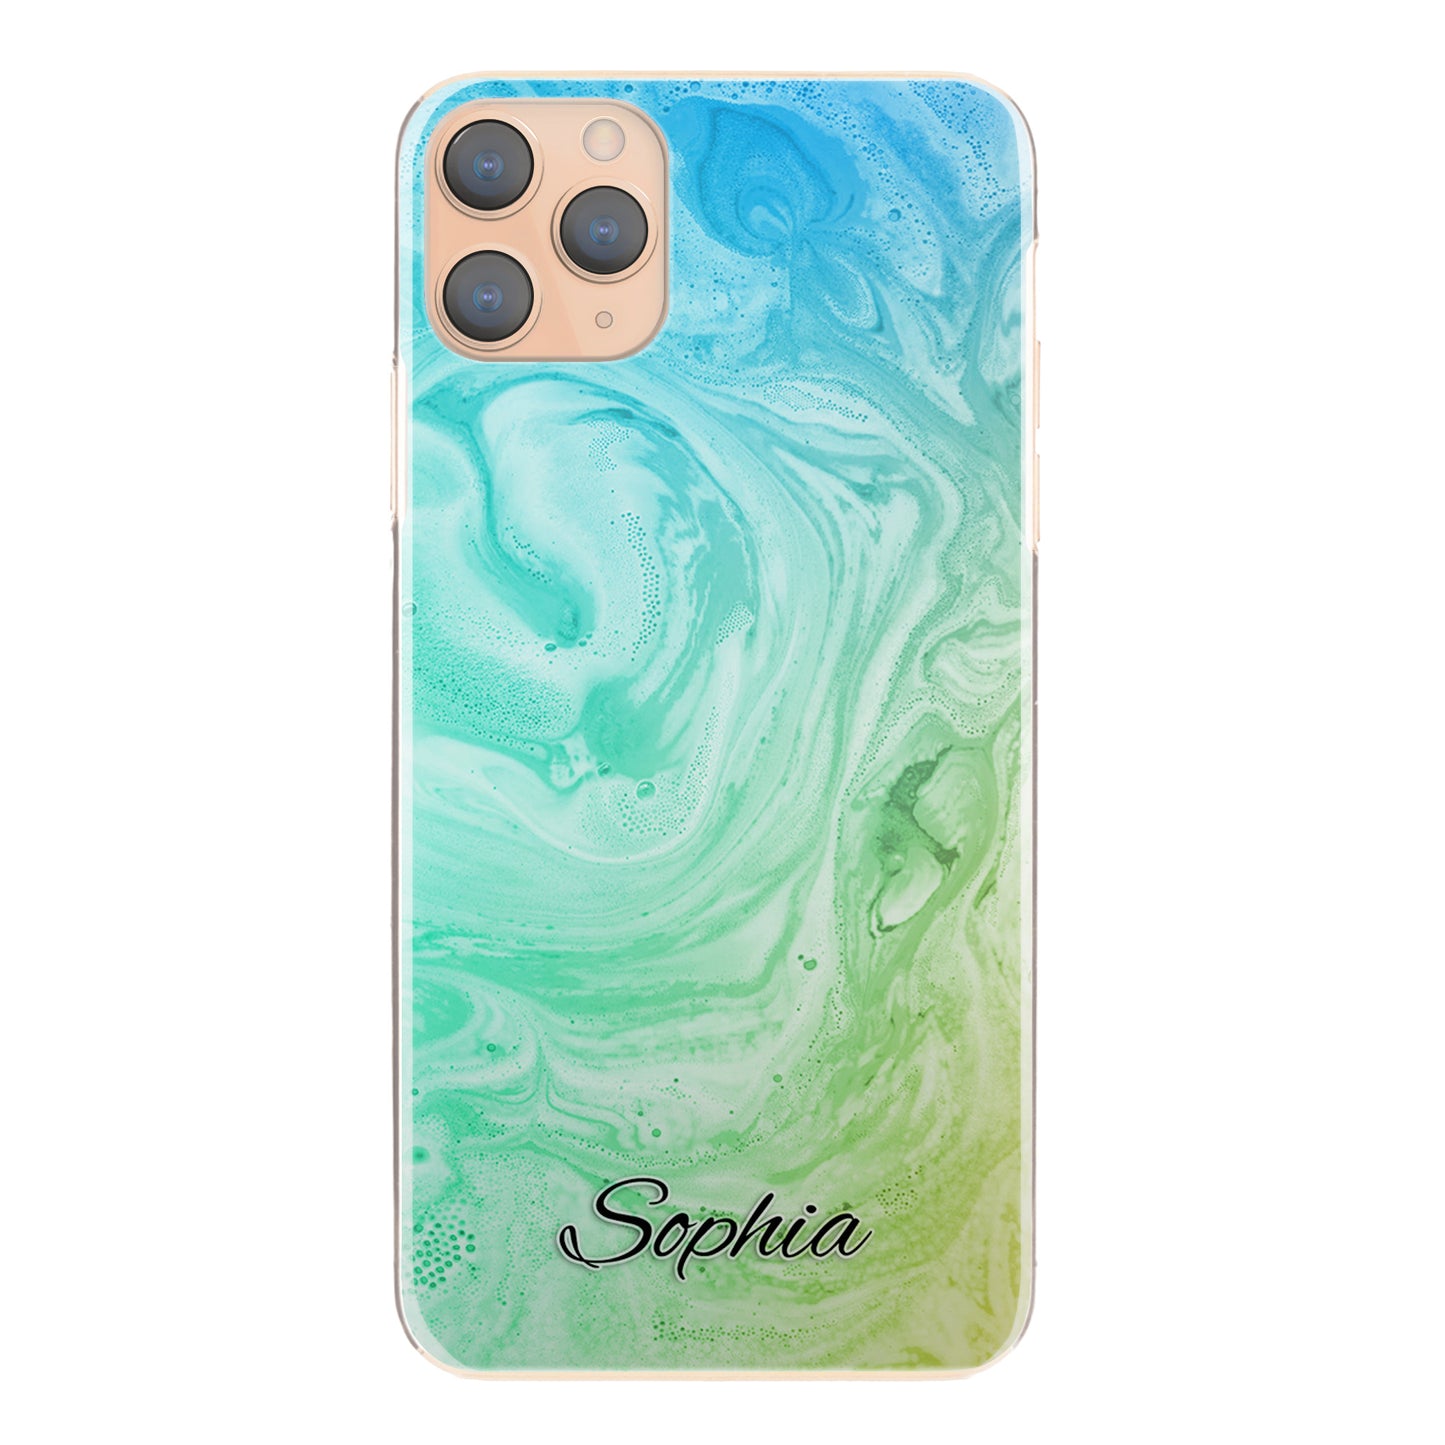 Personalised Apple iPhone Hard Case with Stylish Text on Turquoise Gradient Swirled Marble